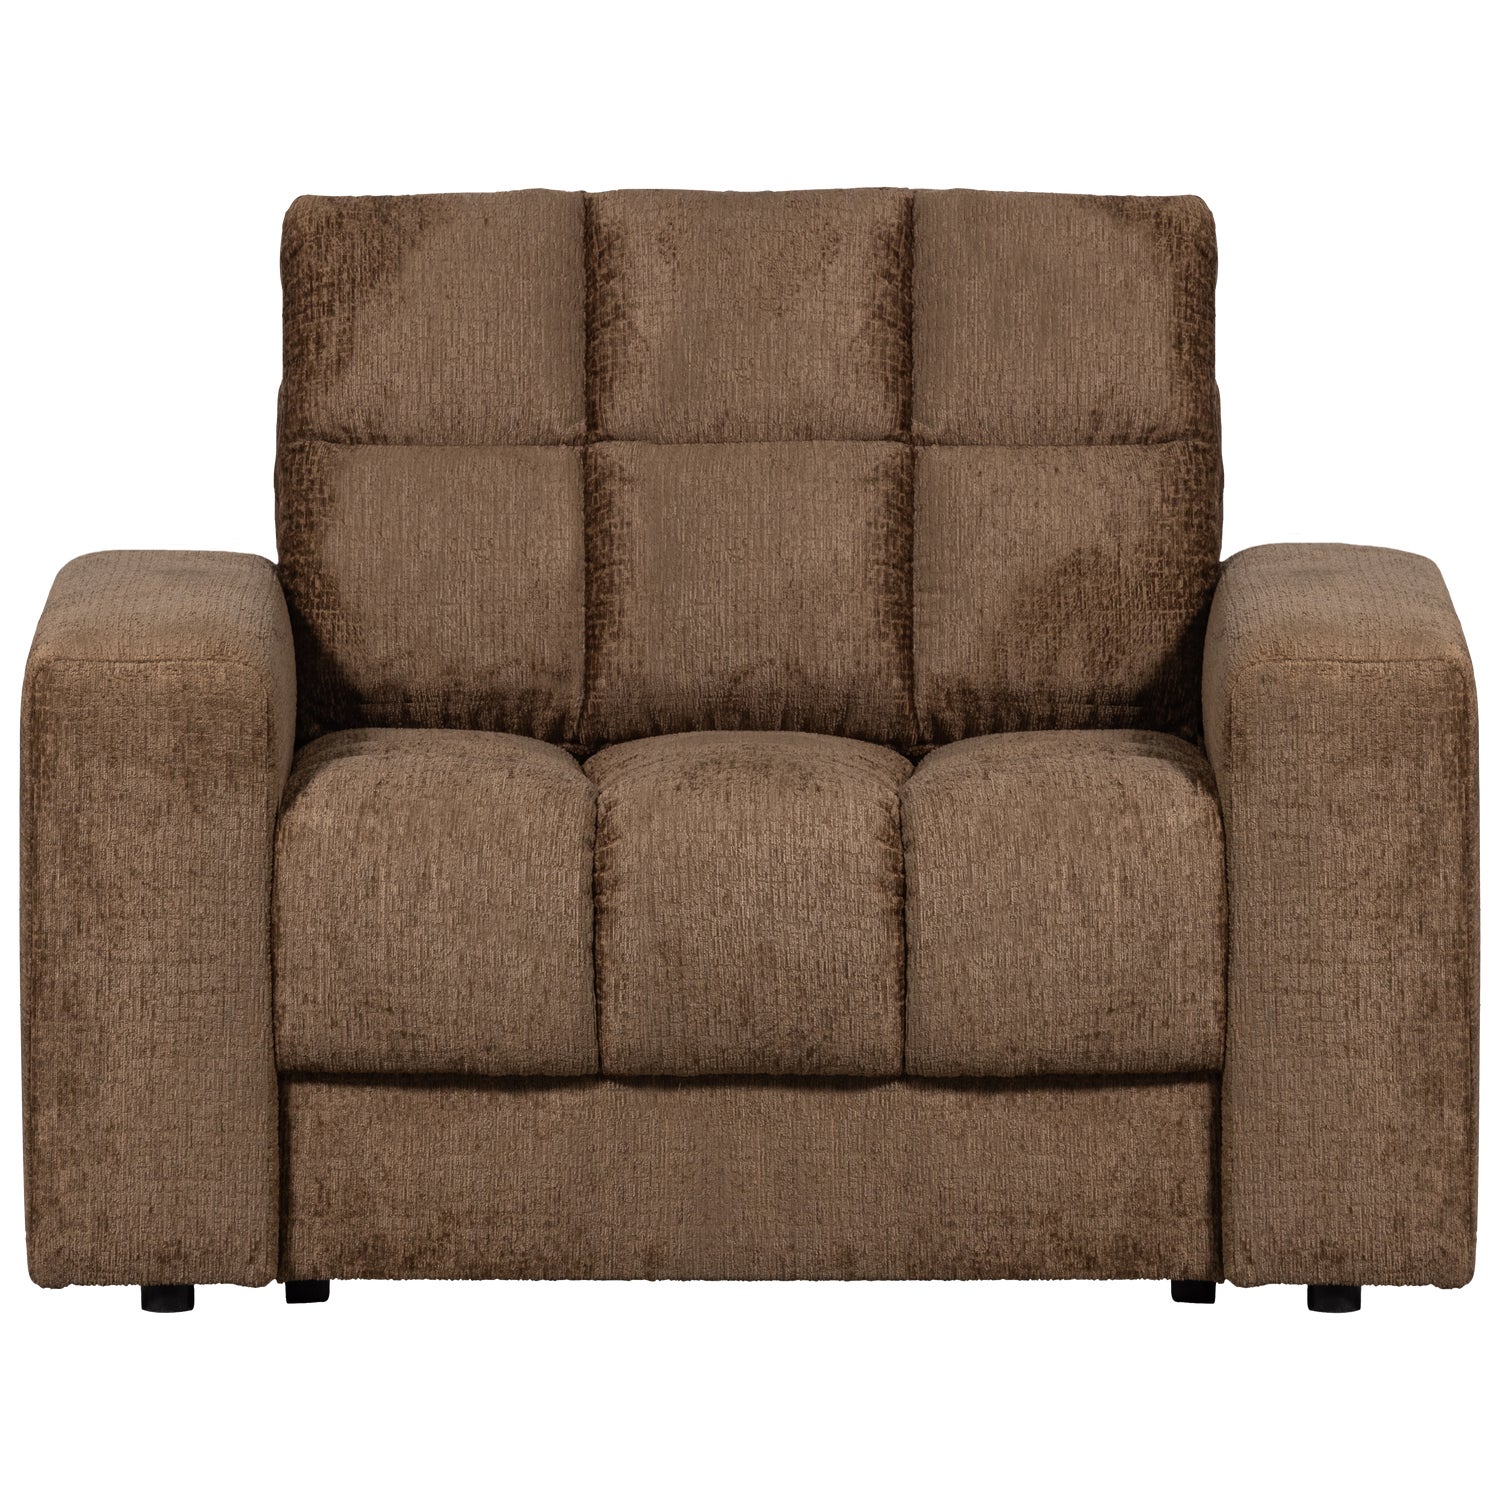 379003-BR-01_VS_WE_Second_date_fauteuil_structure_velvet_brass.png?auto=webp&format=png&width=1500&height=1500